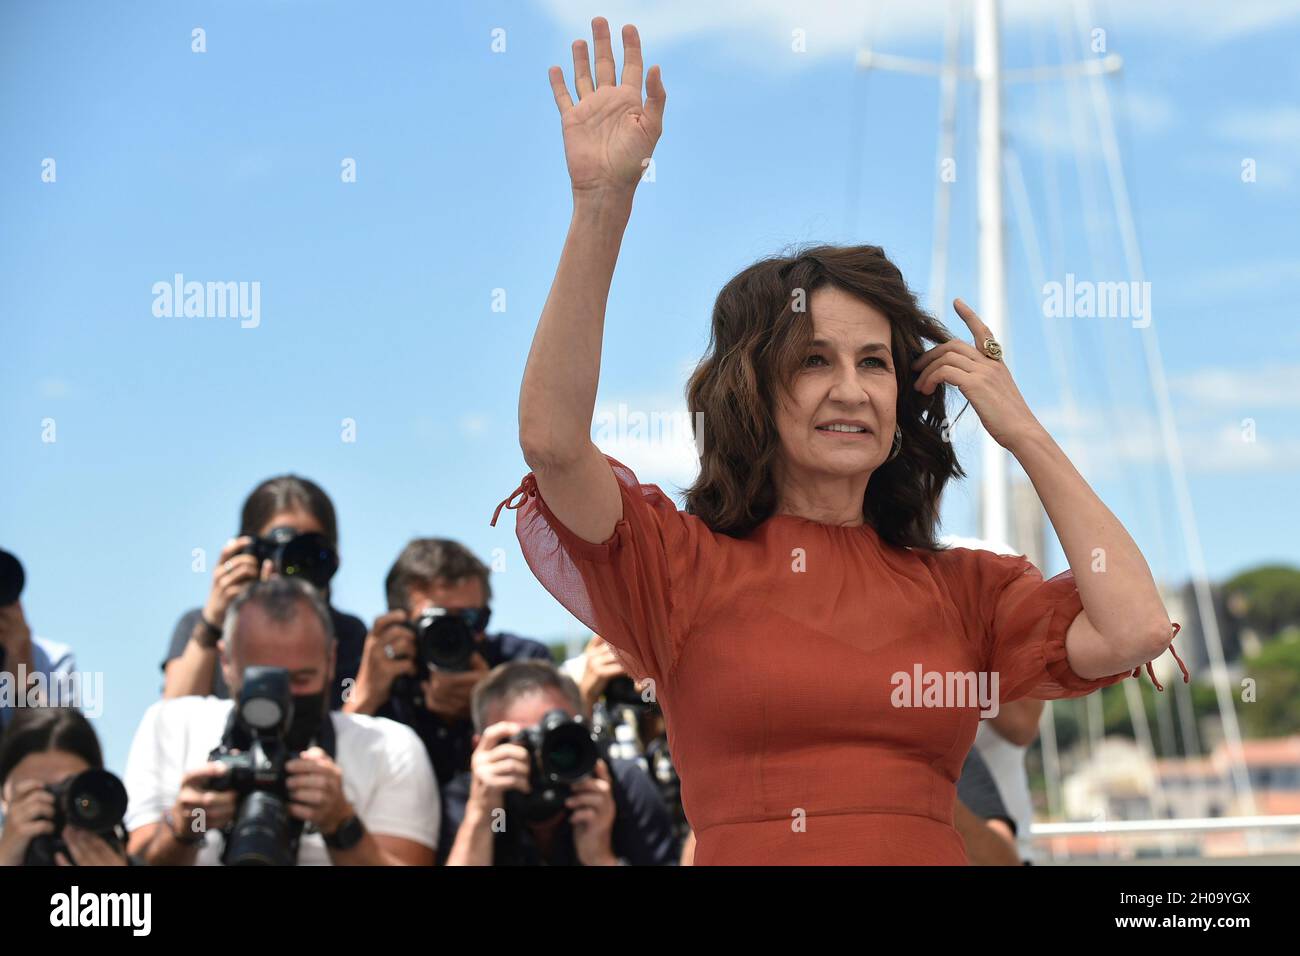 74th edition of the Cannes Film Festival: director and actress Valerie Lemercier posing during a photocall for the film “Aline, The Voice of Love” (Fr Stock Photo